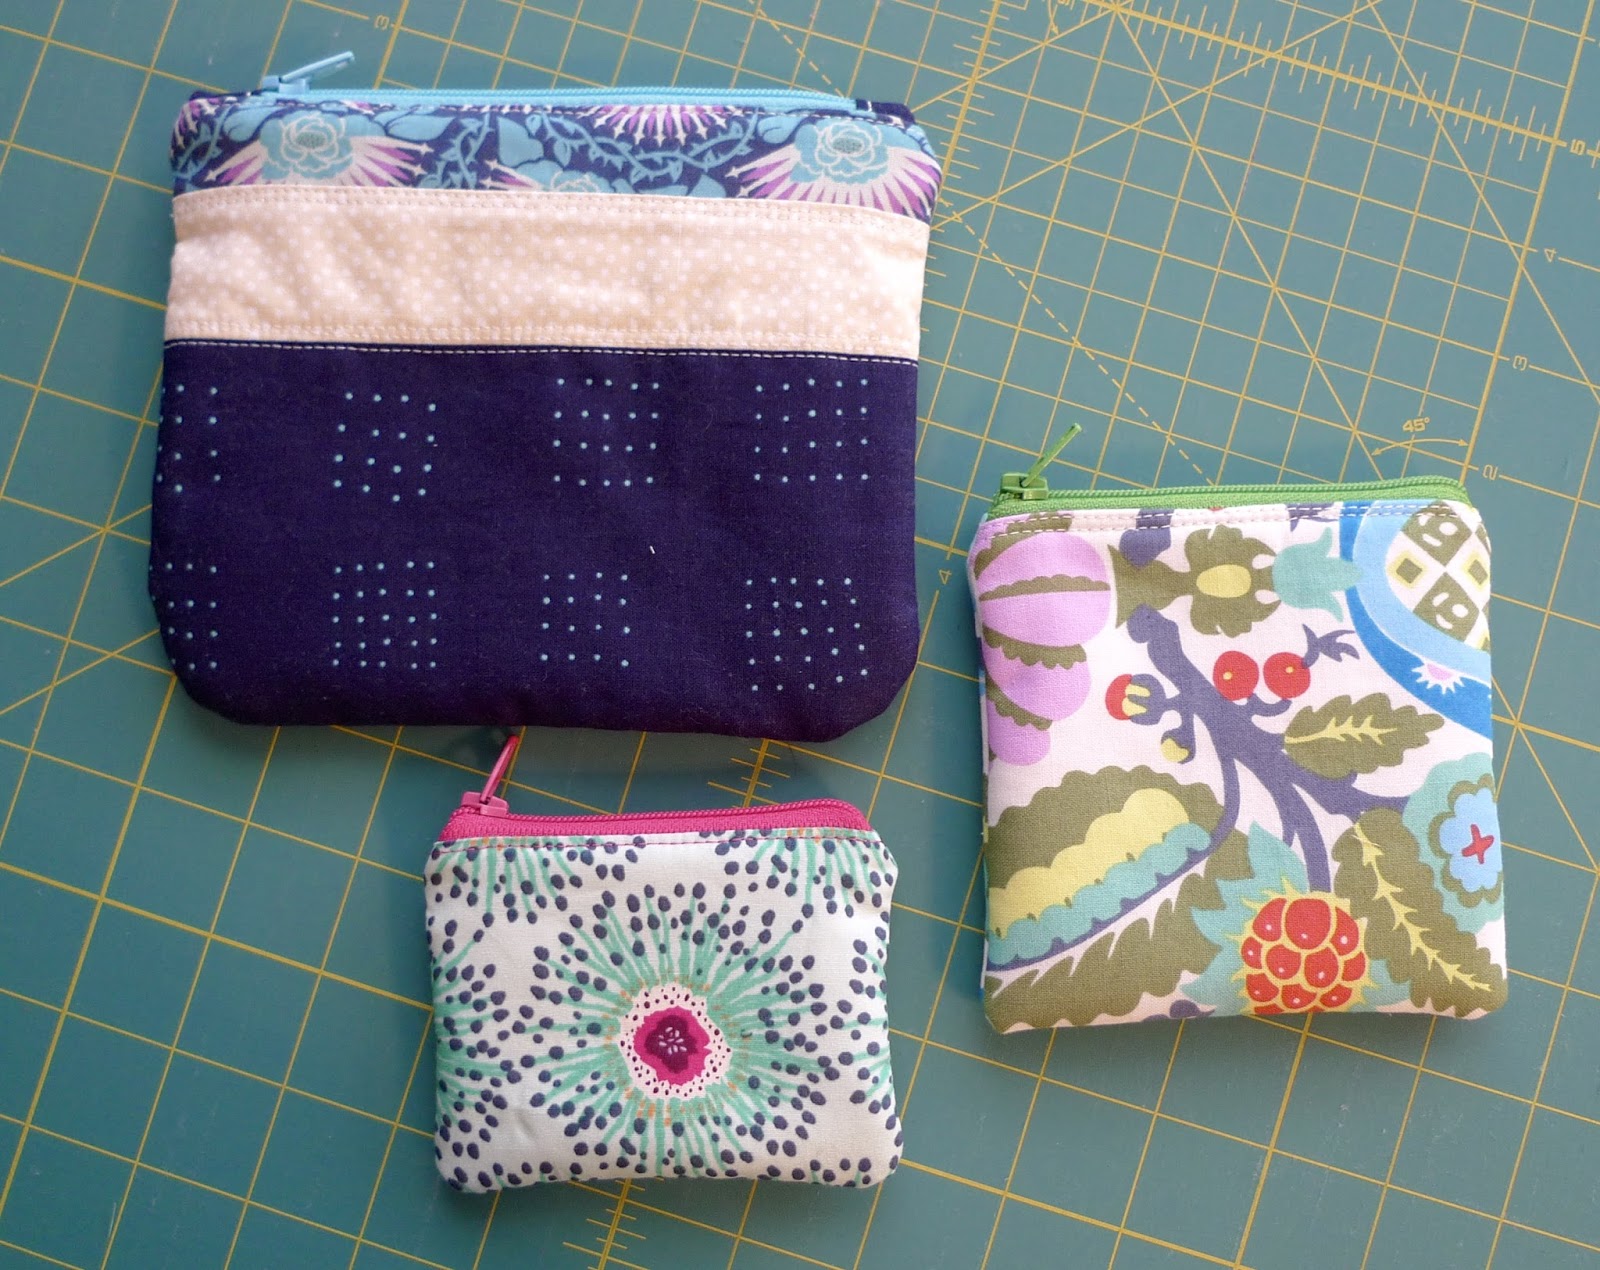 Sew Some Sunshine: And more pouches!